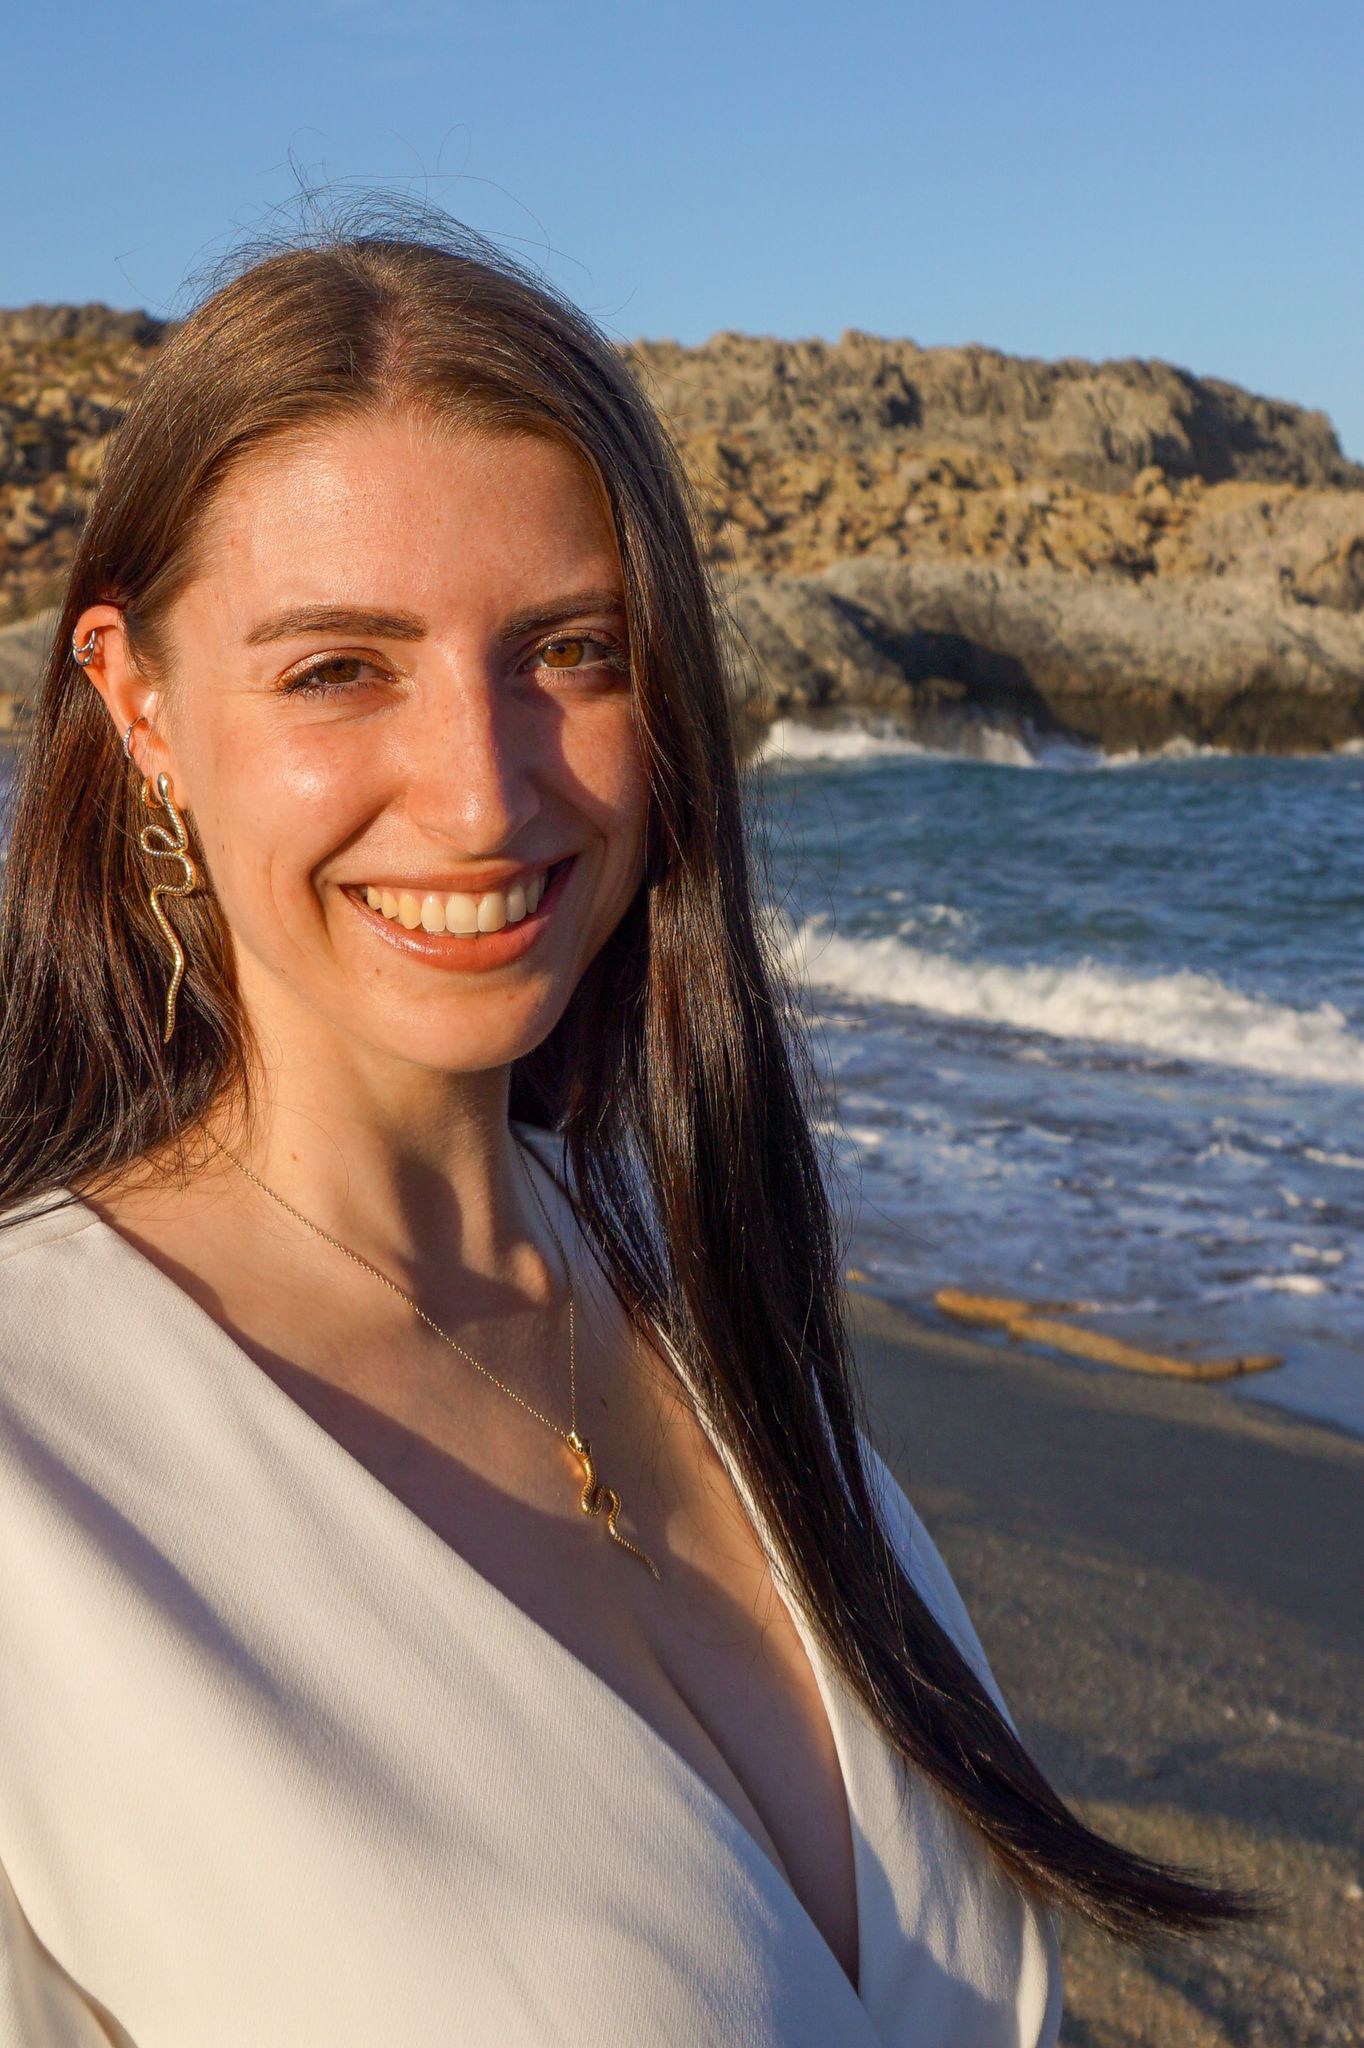 Anki at the sea wearing a white dress and smiling into the camera